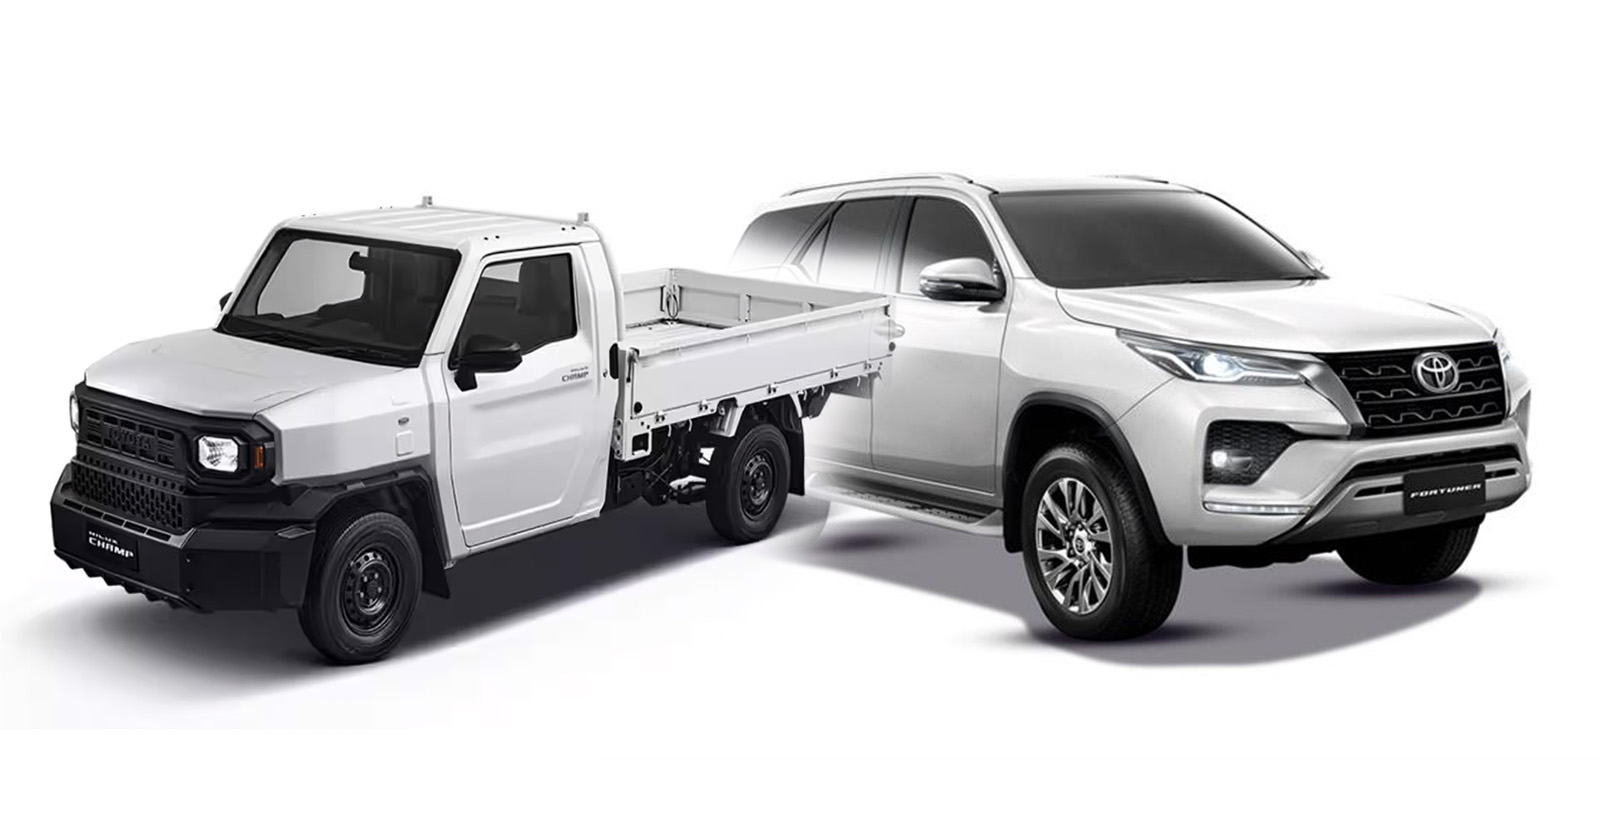 Toyota Hilux Champ: Features & specs